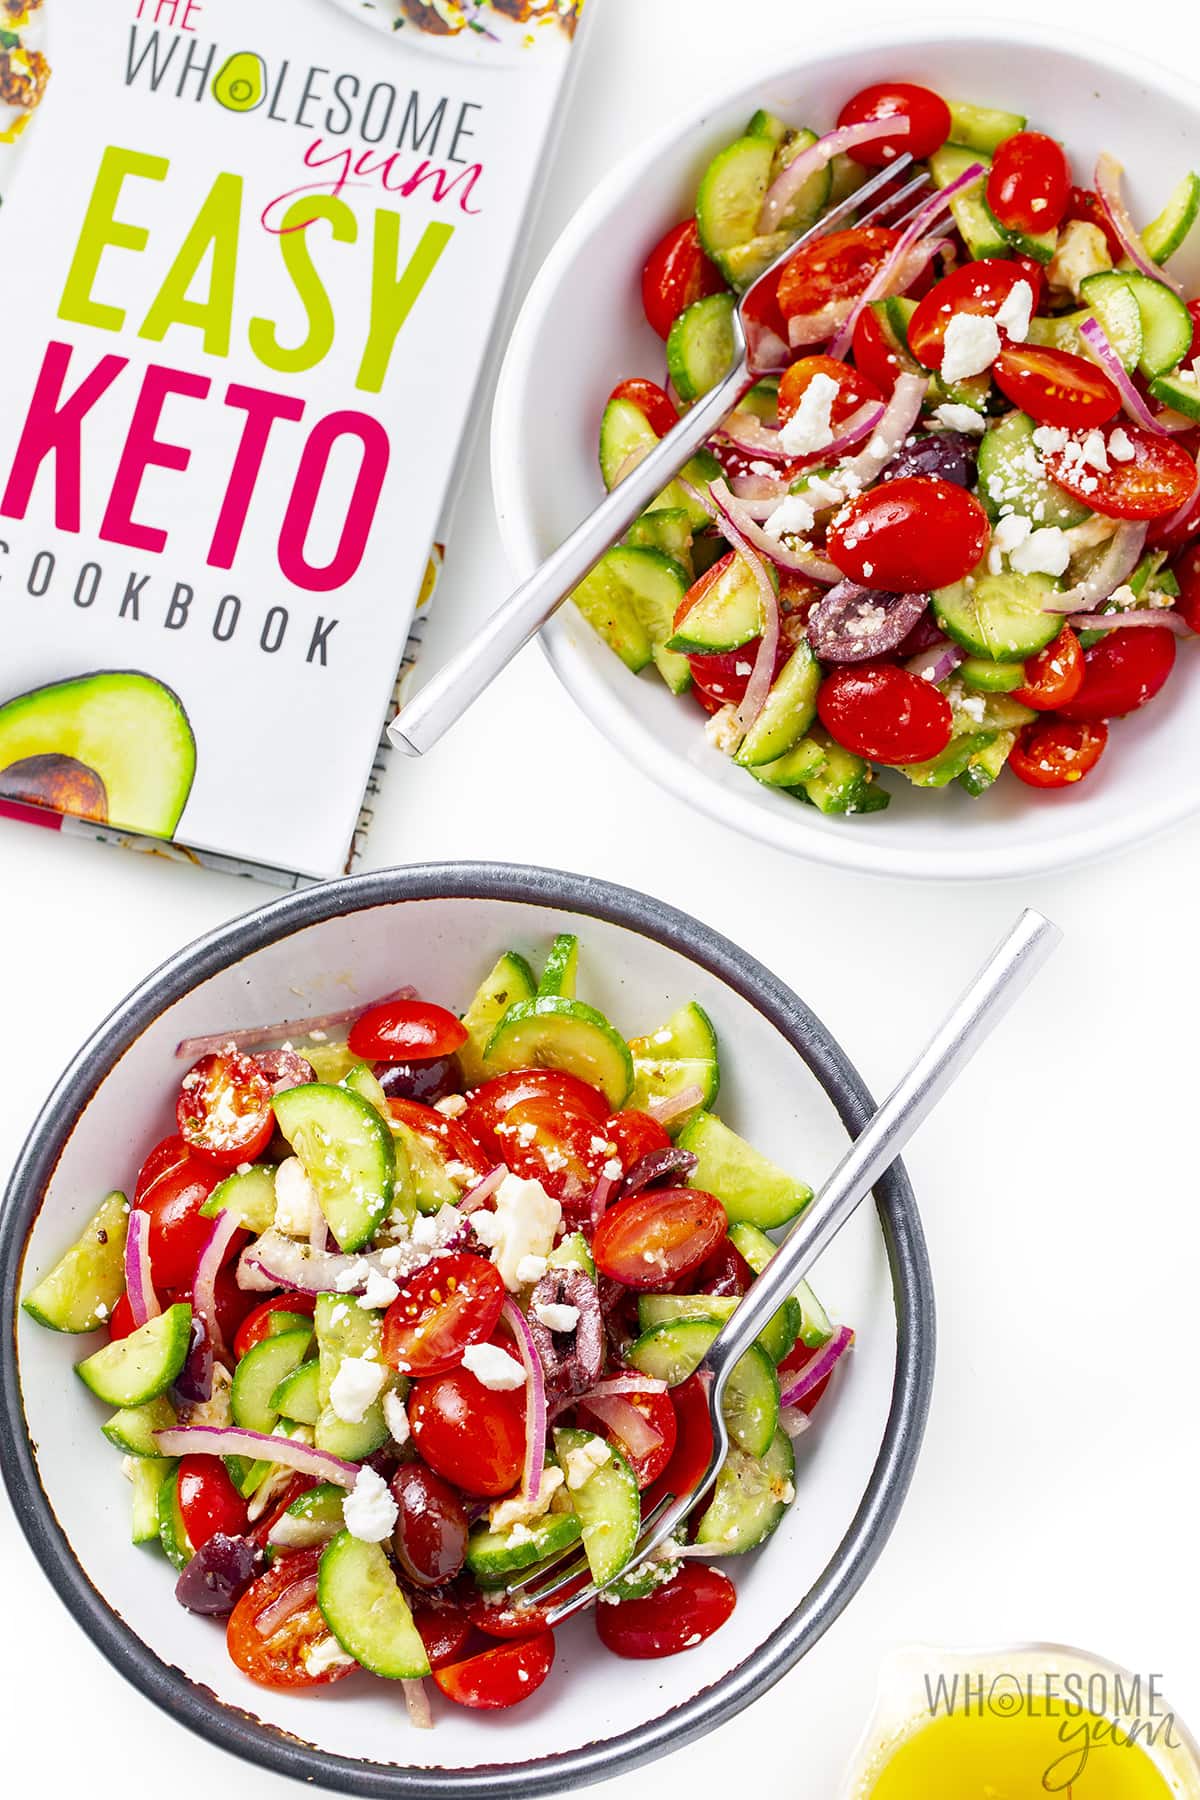 Greek salad recipe in two bowls next to cookbook.